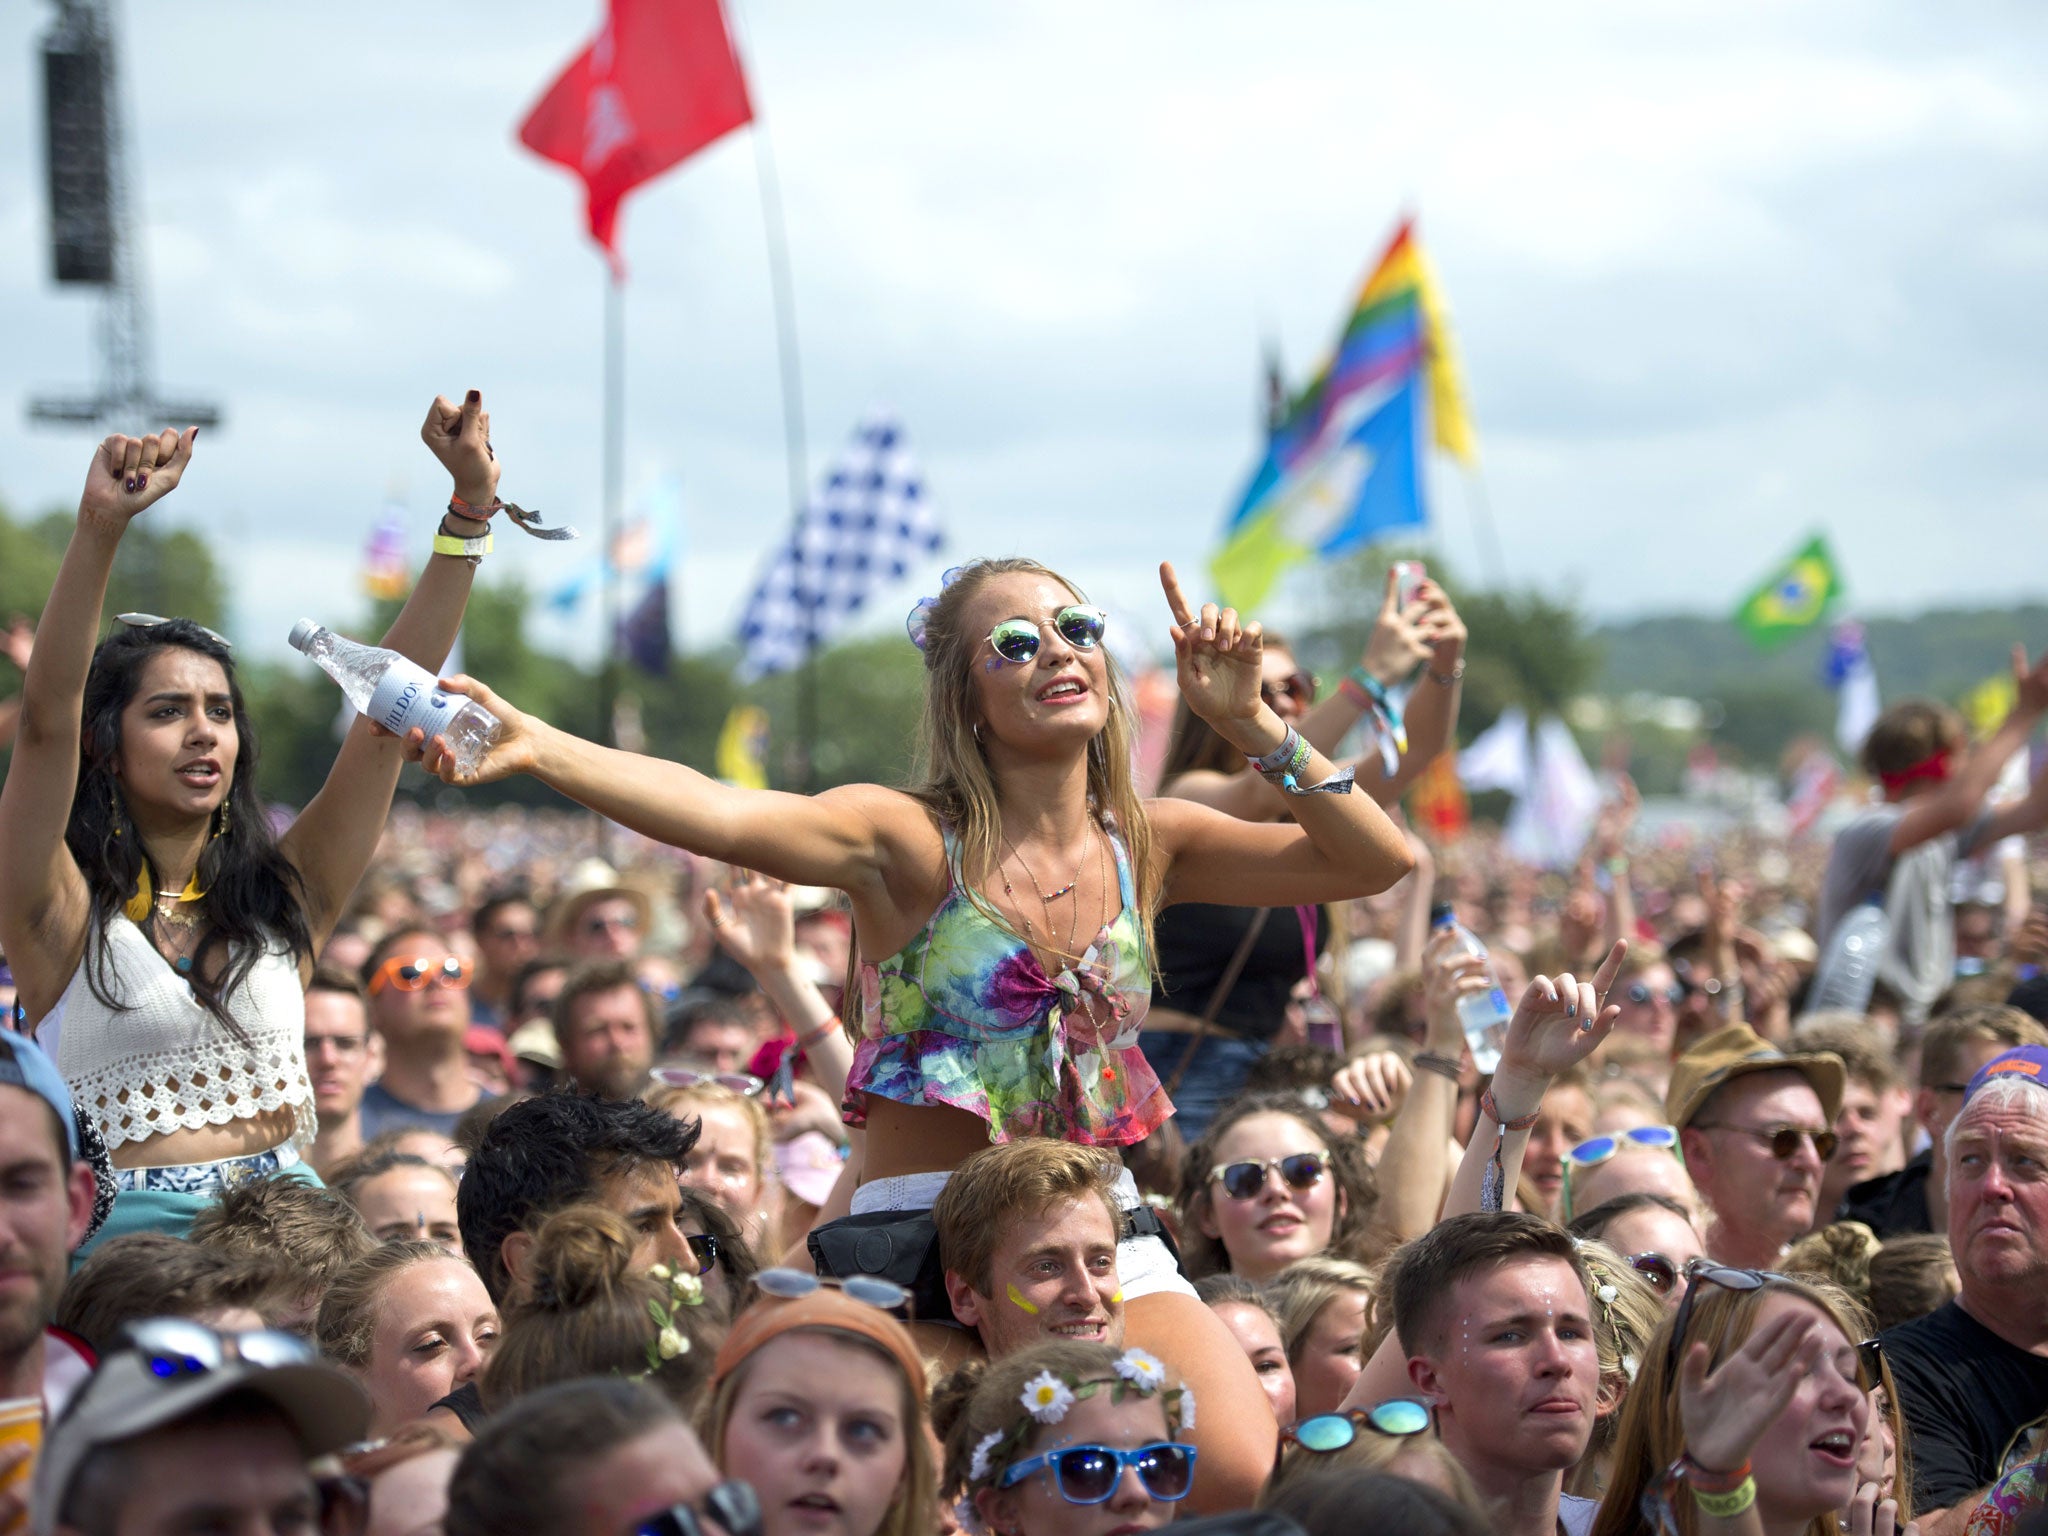 More than 100,000 people will attend Glastonbury festival in 2016